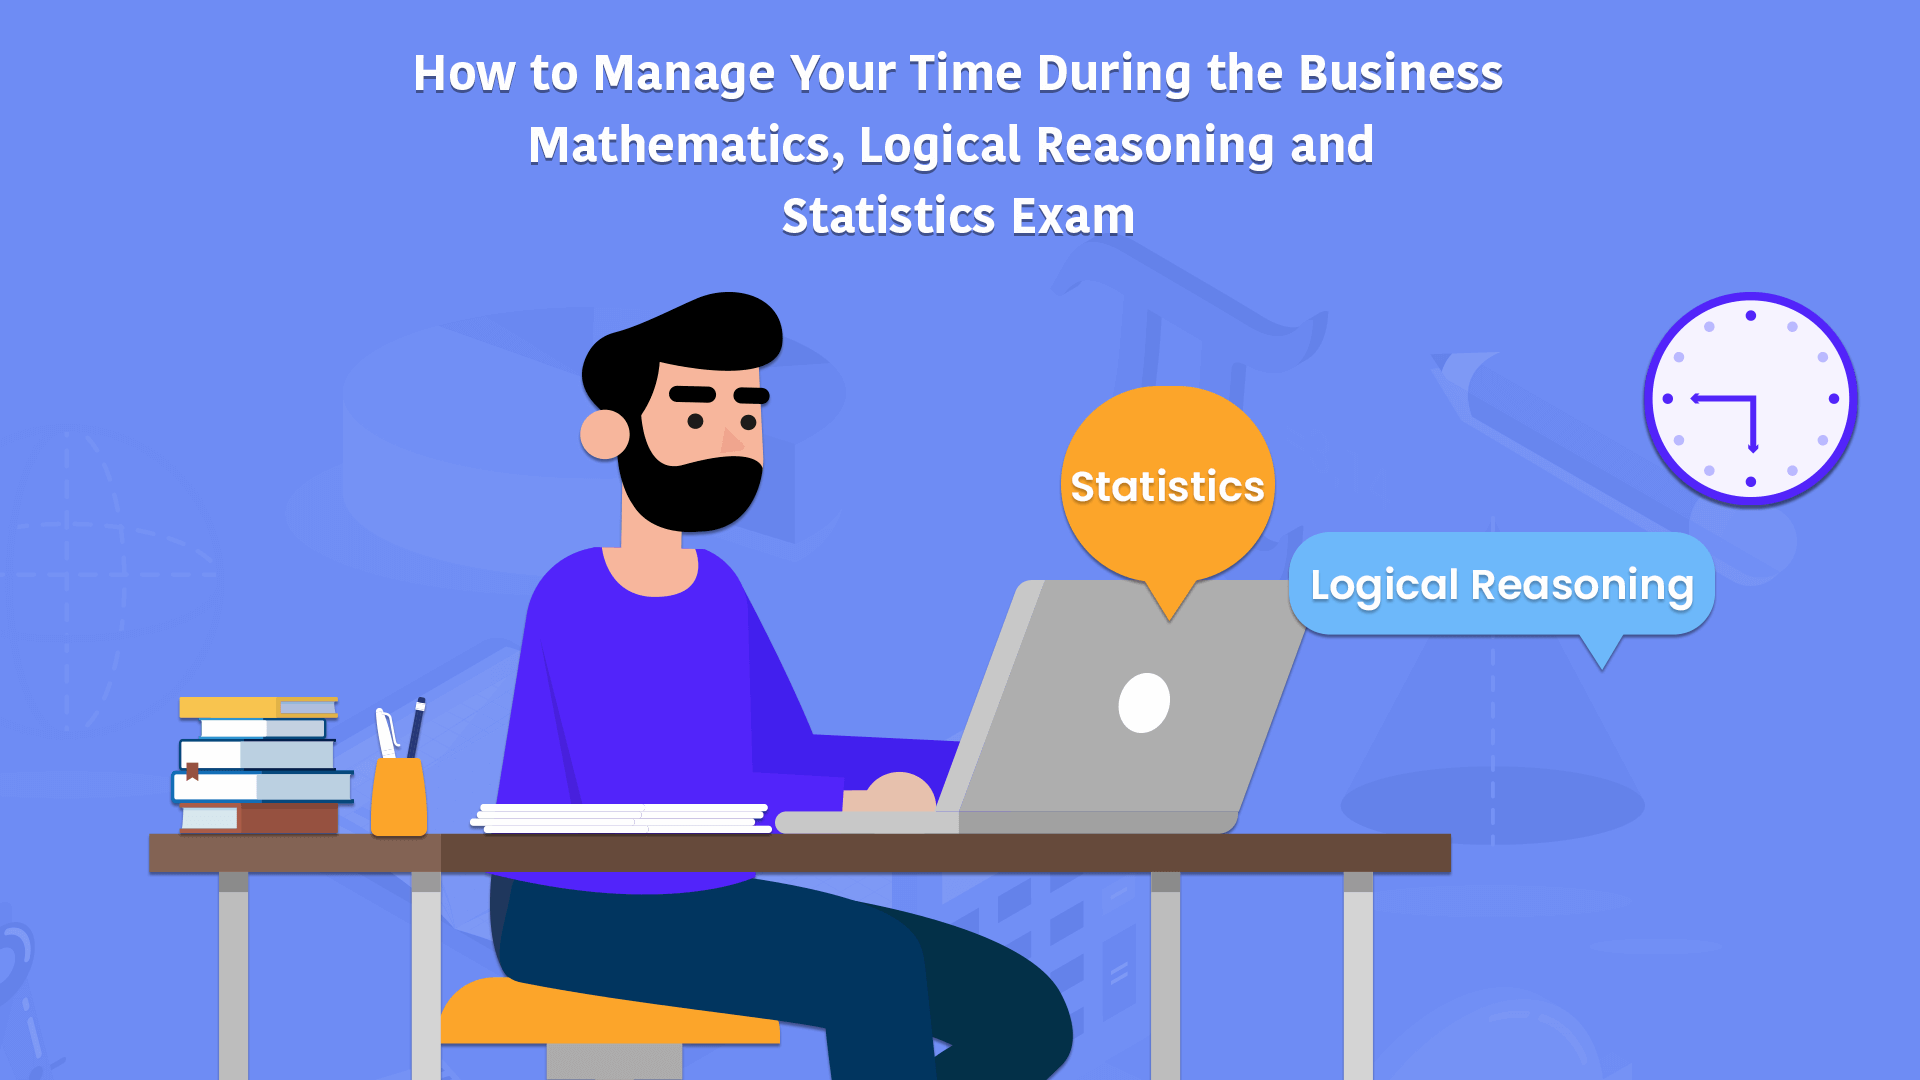 How to Manage Your Time When Attempting the CA Foundation Business Mathematics, Logical Reasoning and Statistics Paper